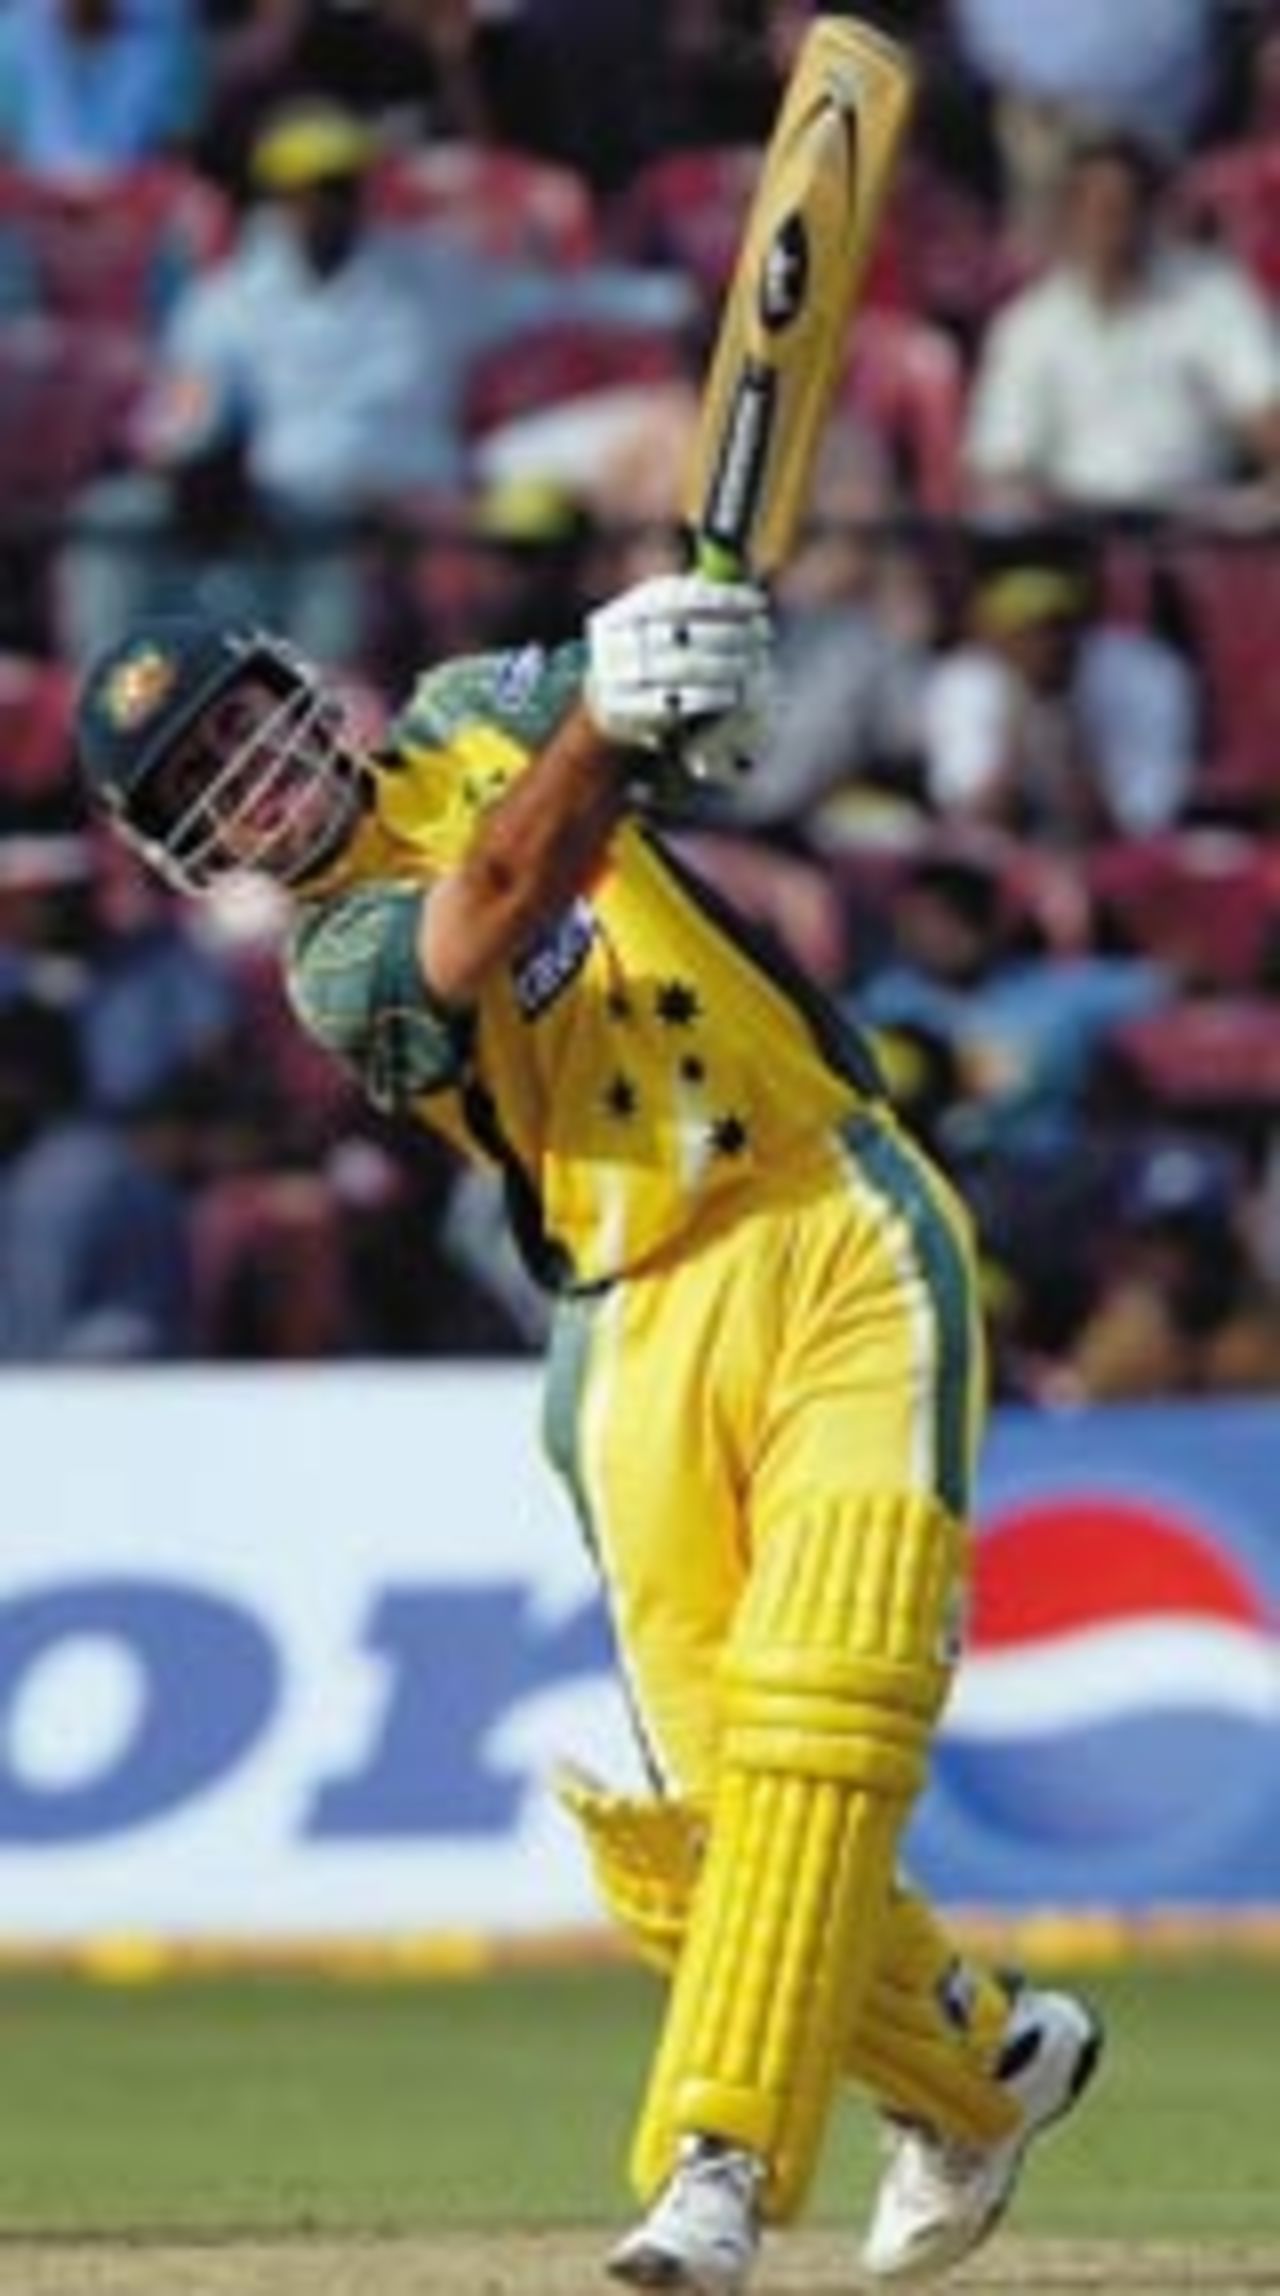 Ricky Ponting comes down the pitch and plays a lofted shot, India v Australia, TVS Cup, Bangalore, November 12, 2003